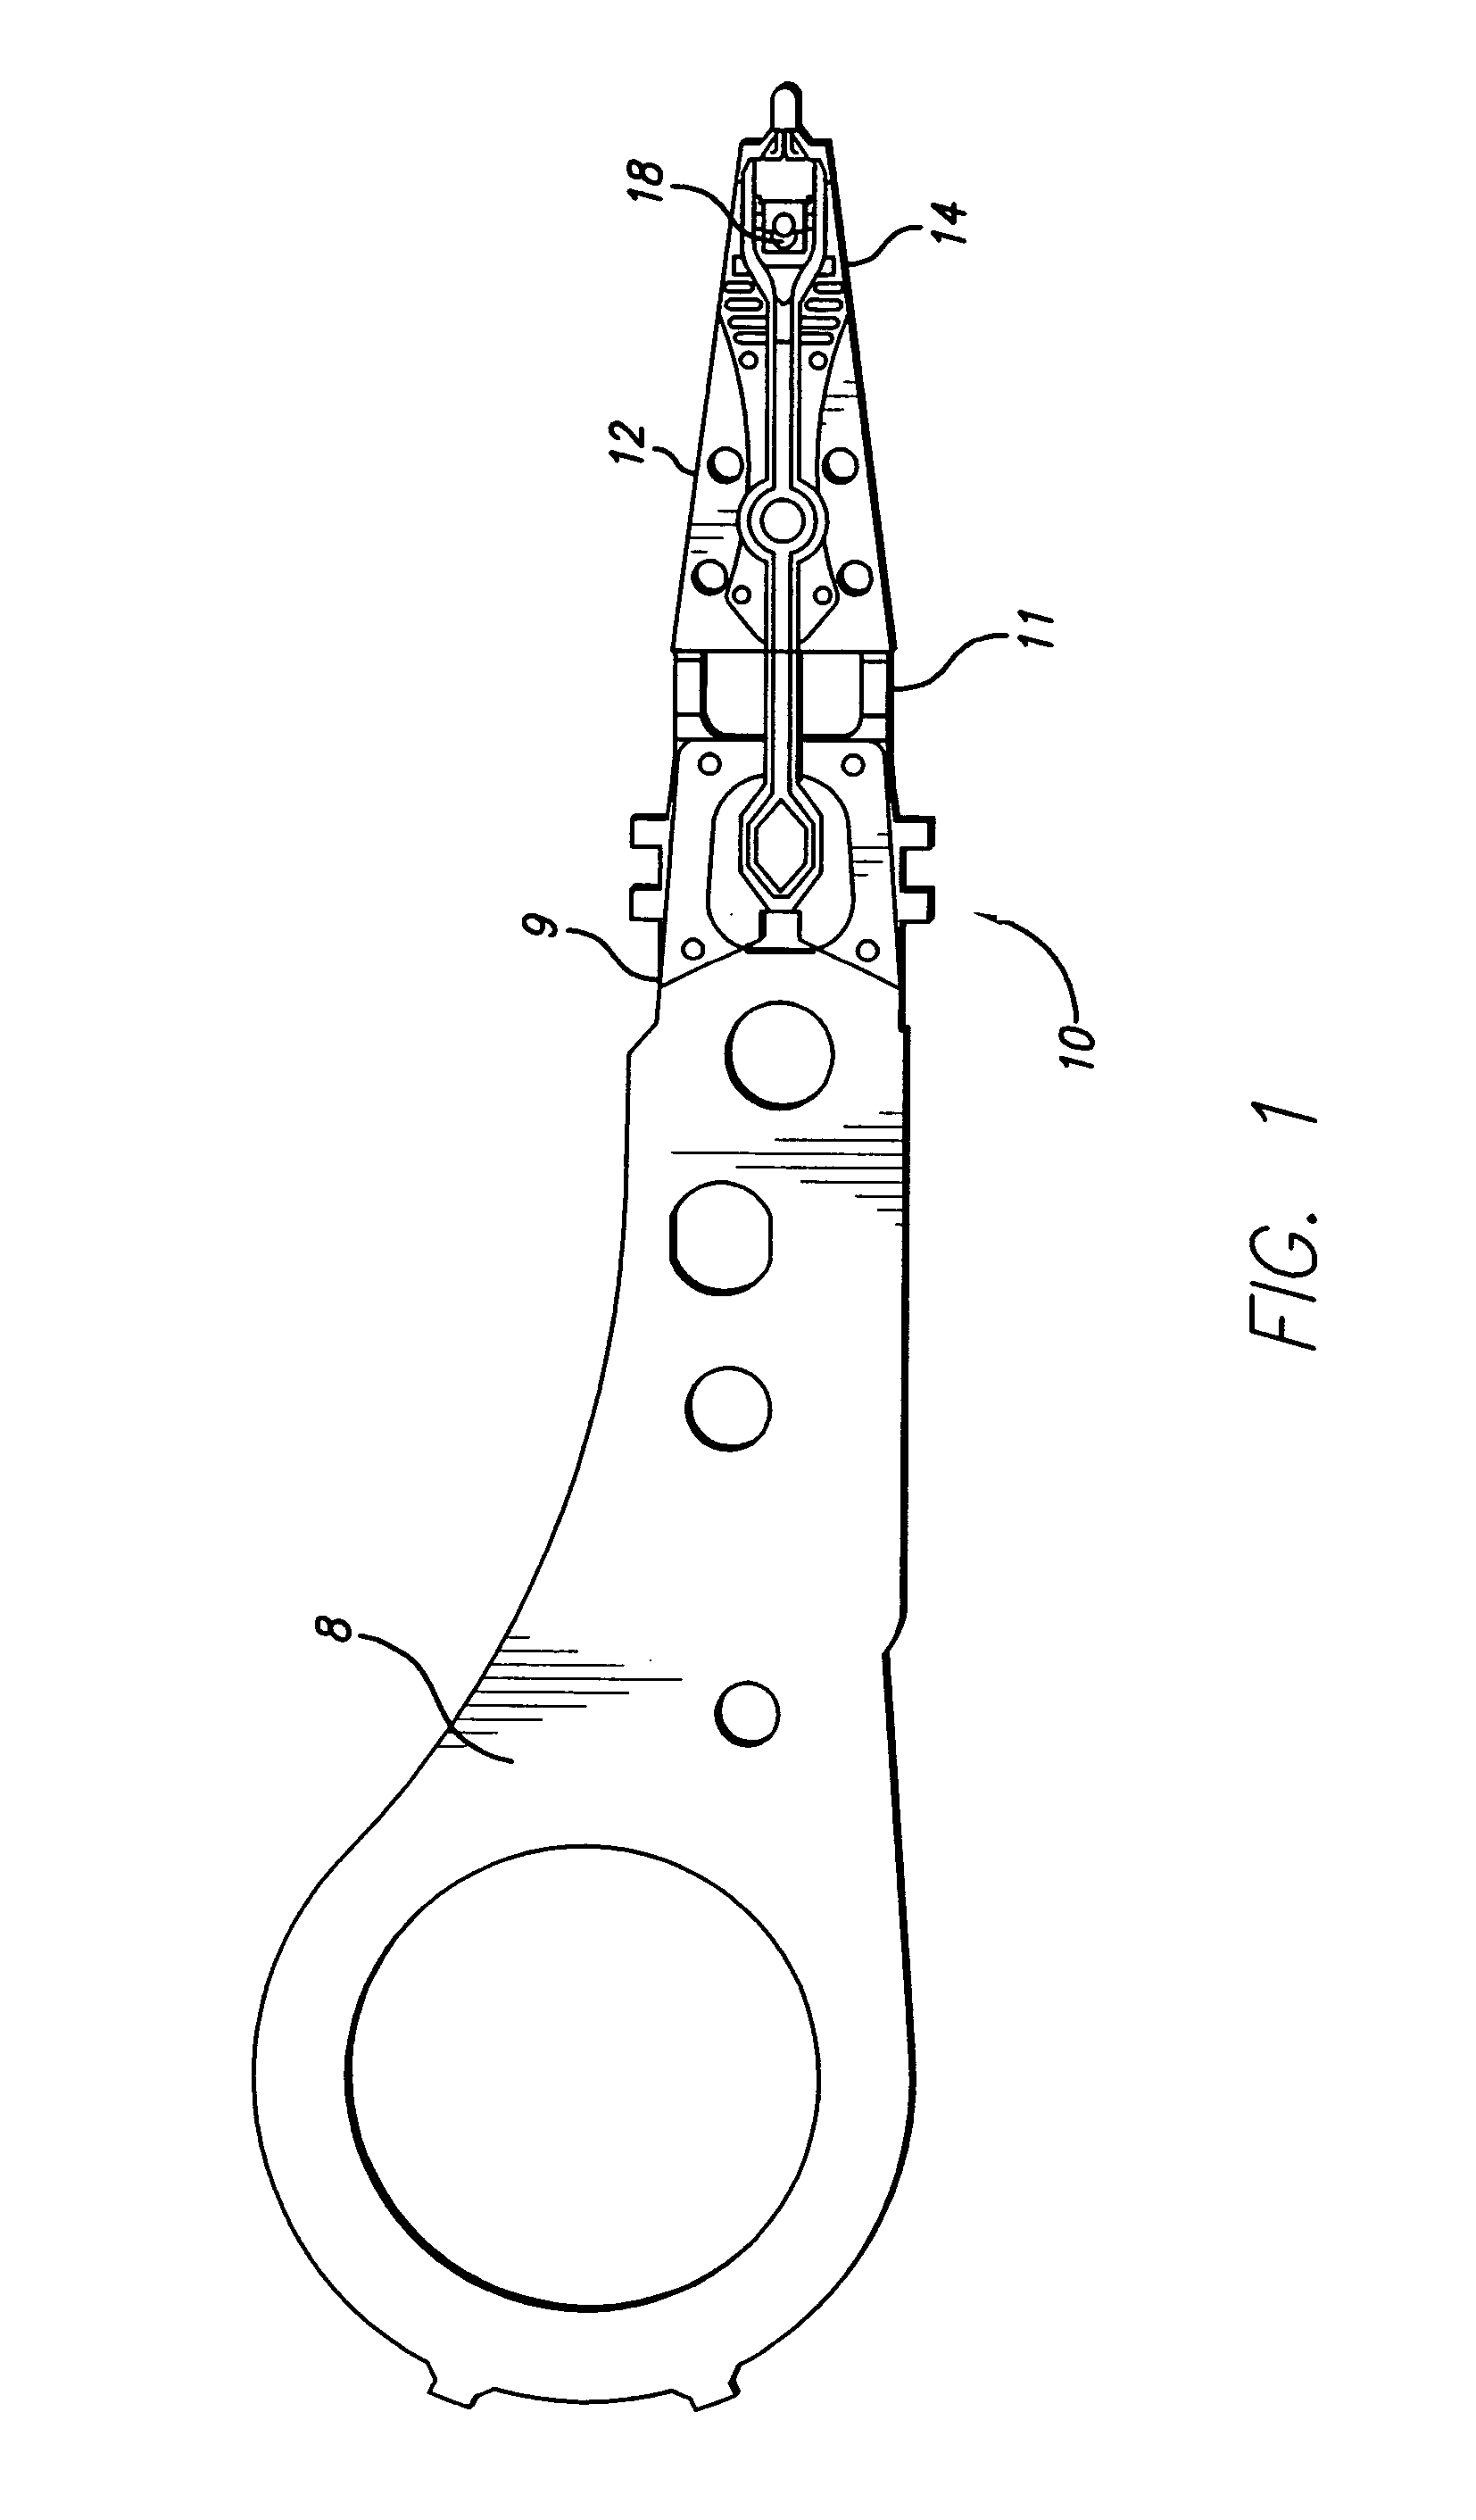 Suspension limiter with proximally cantilevered limiter members